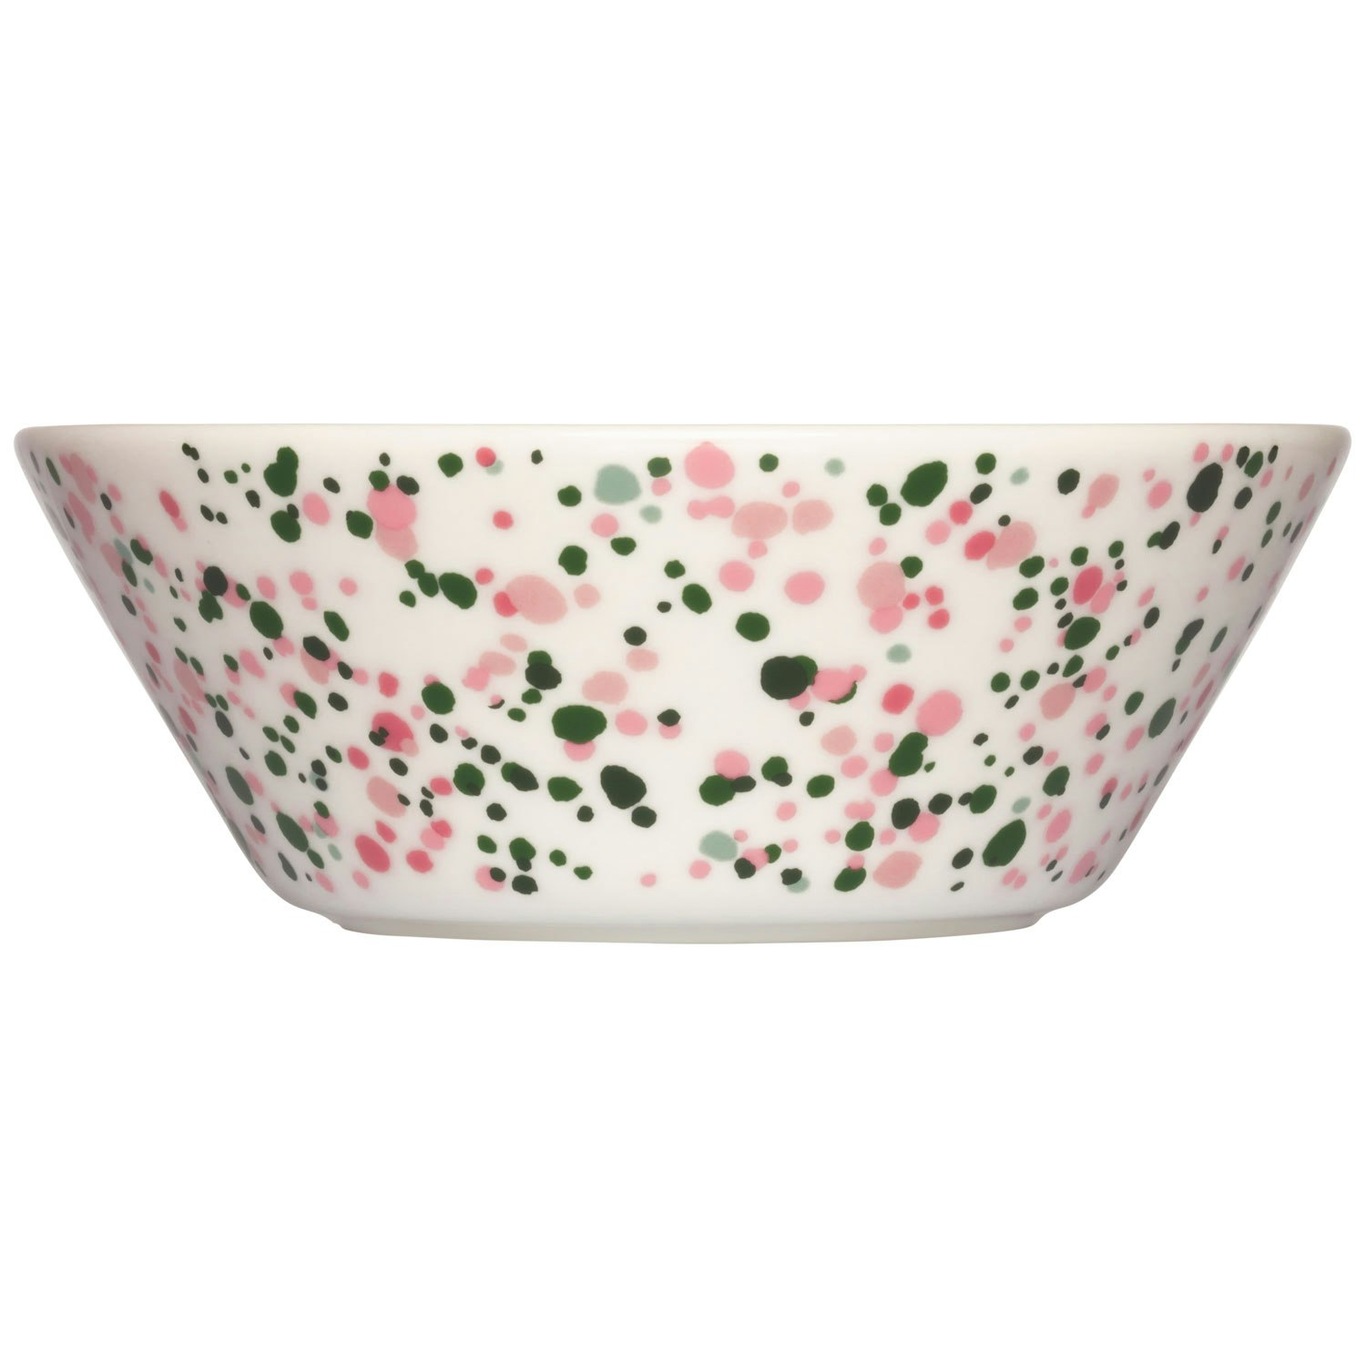 Oiva Toikka Collection Bowl 15 cm, Helle Pink/Green